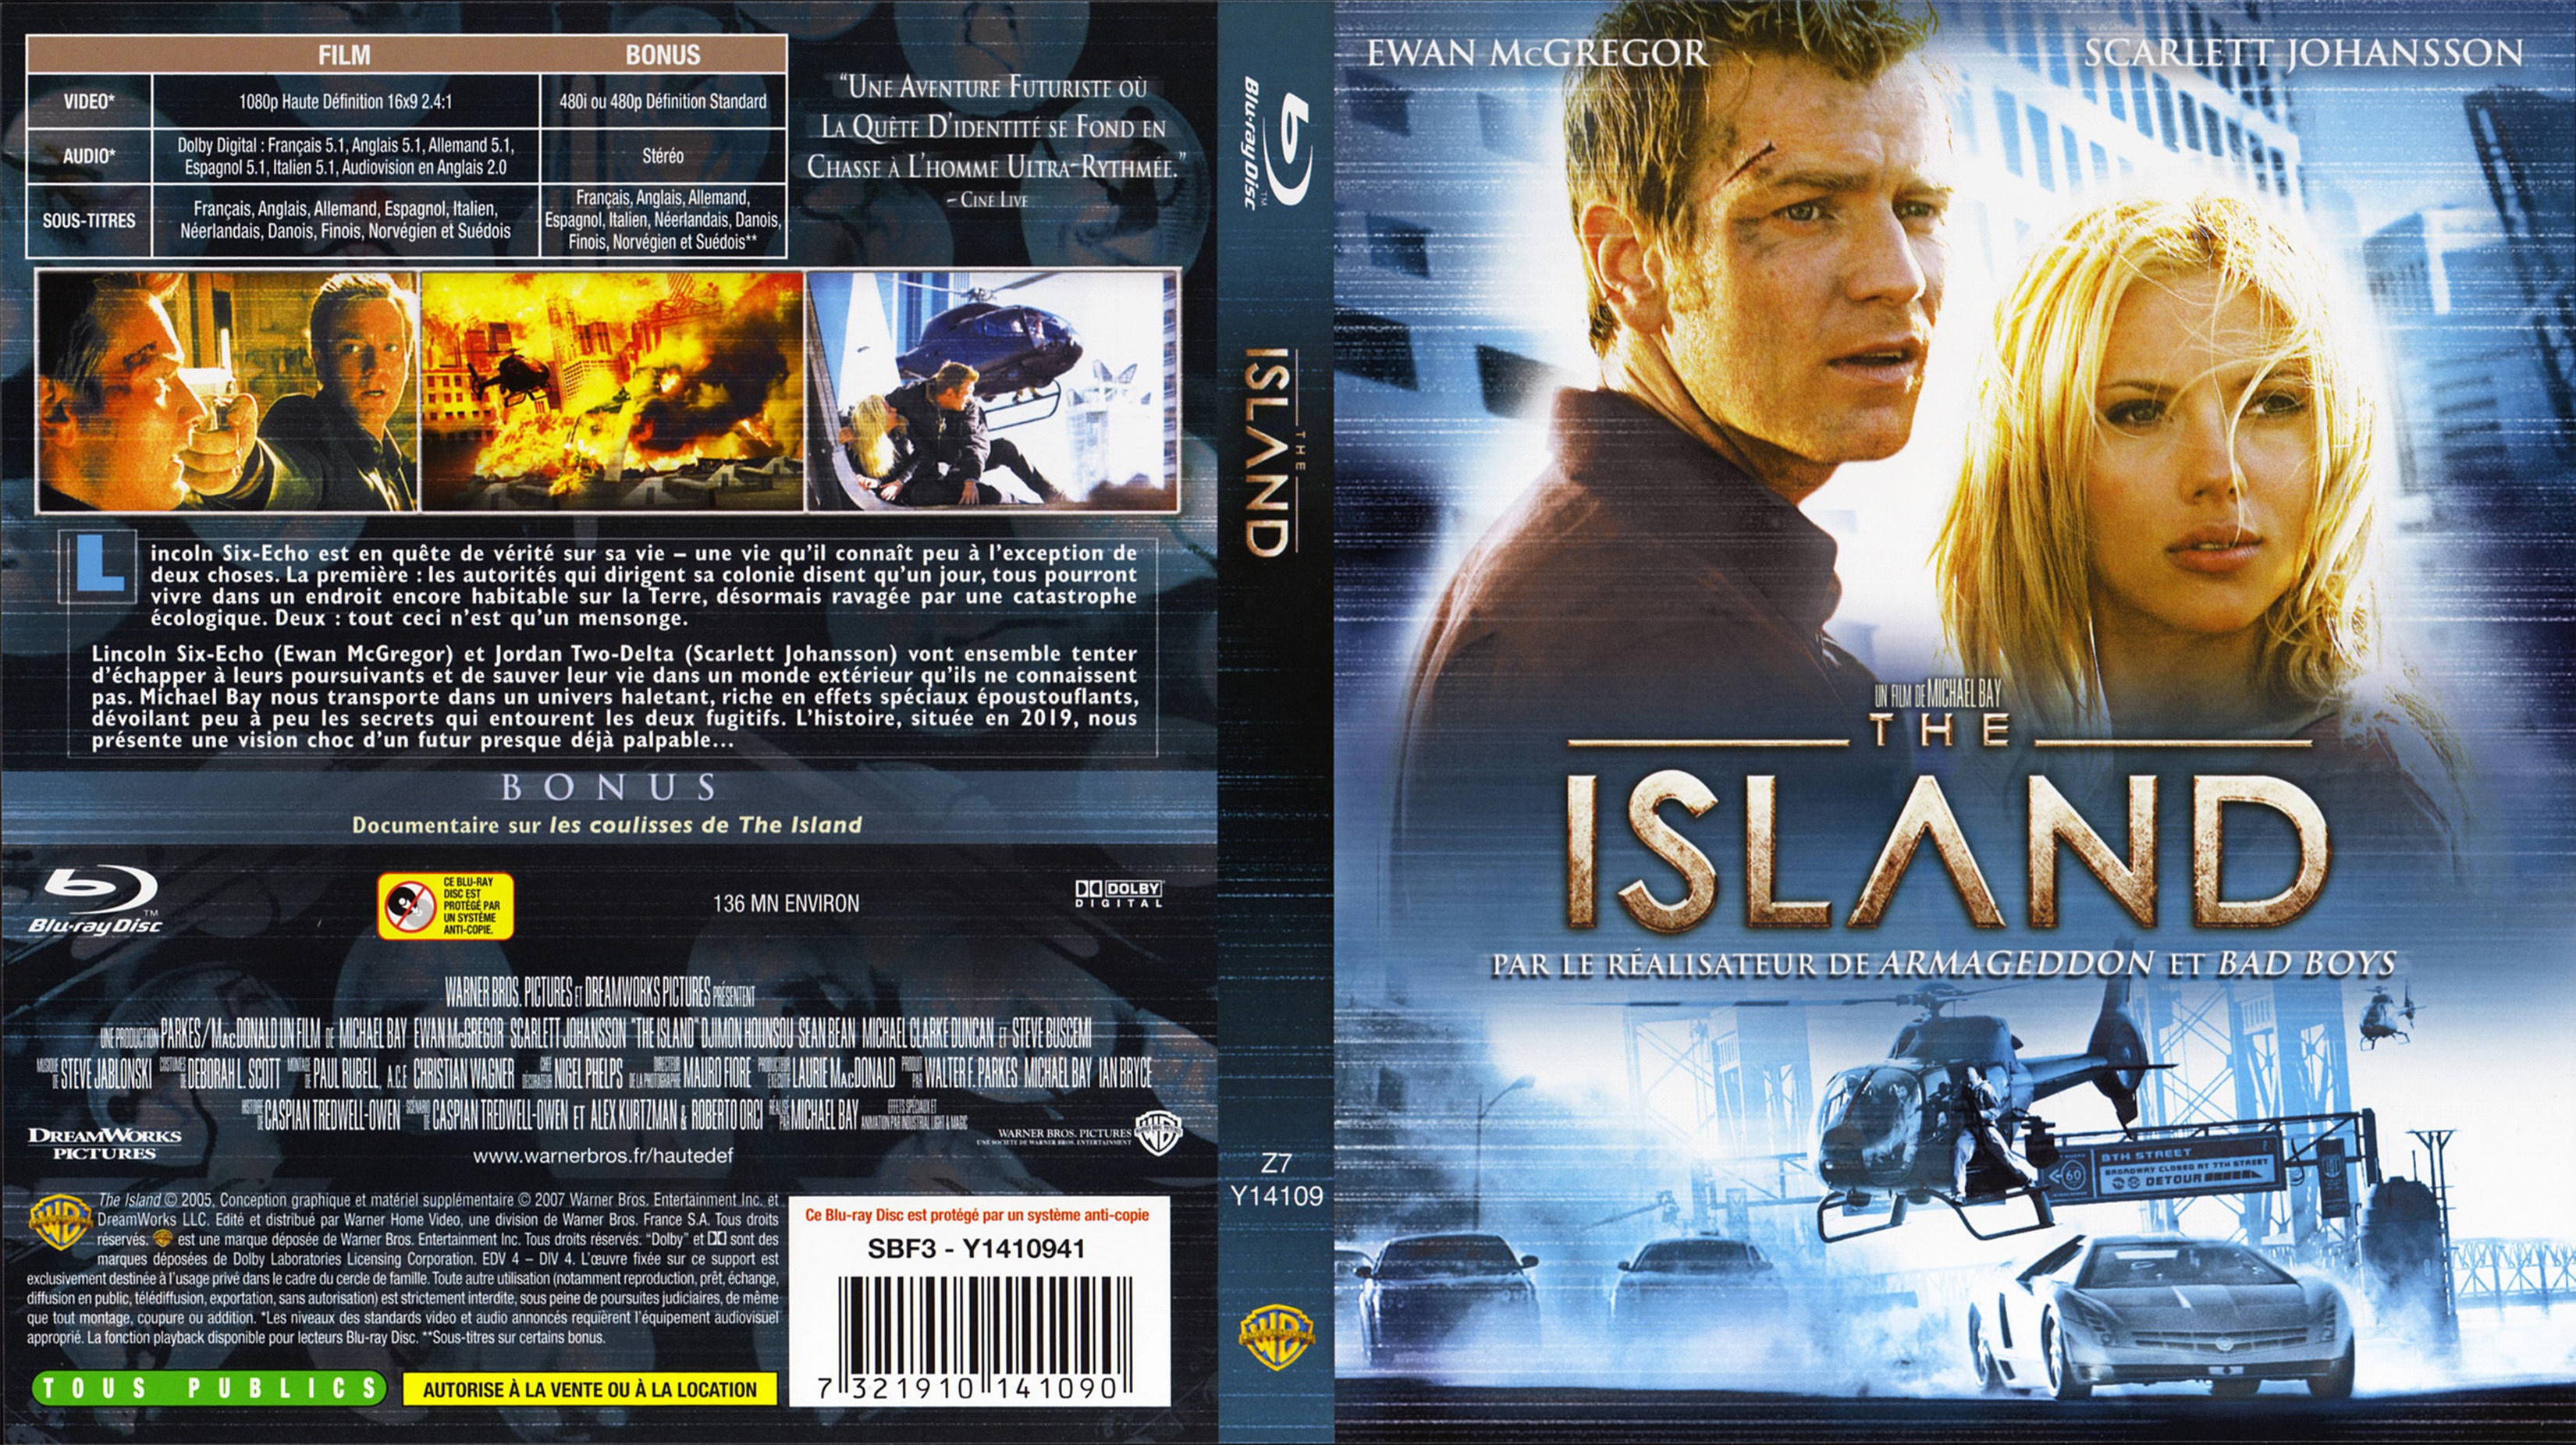 Jaquette DVD The island (BLU-RAY)